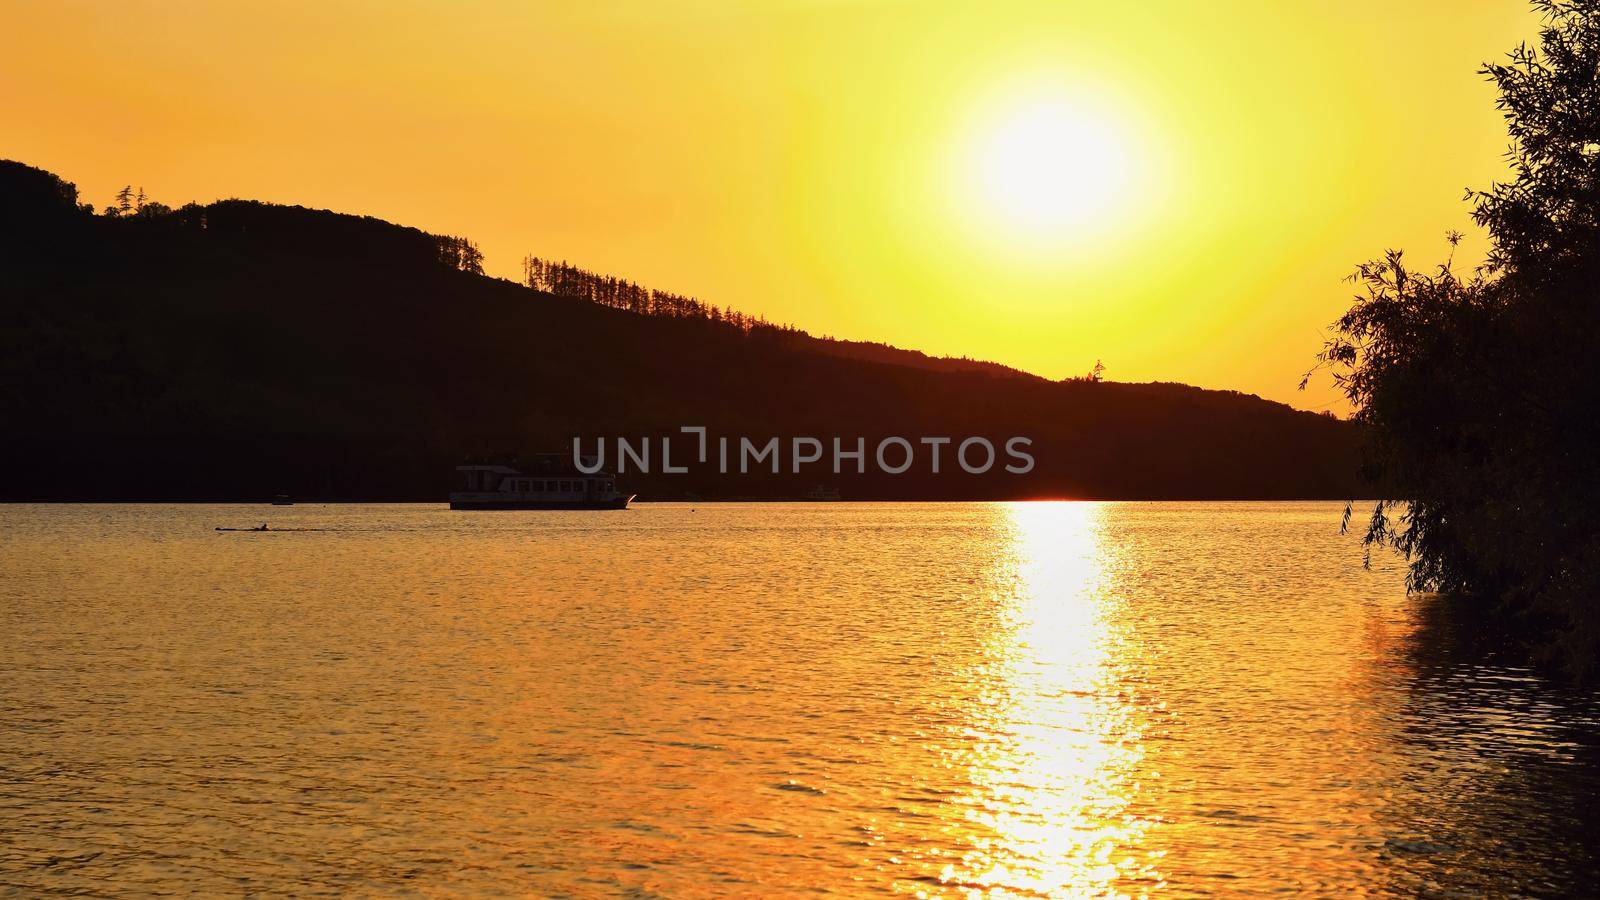 Brno dam. The city of Brno-Europe. Beautiful sunset by water with a boat.